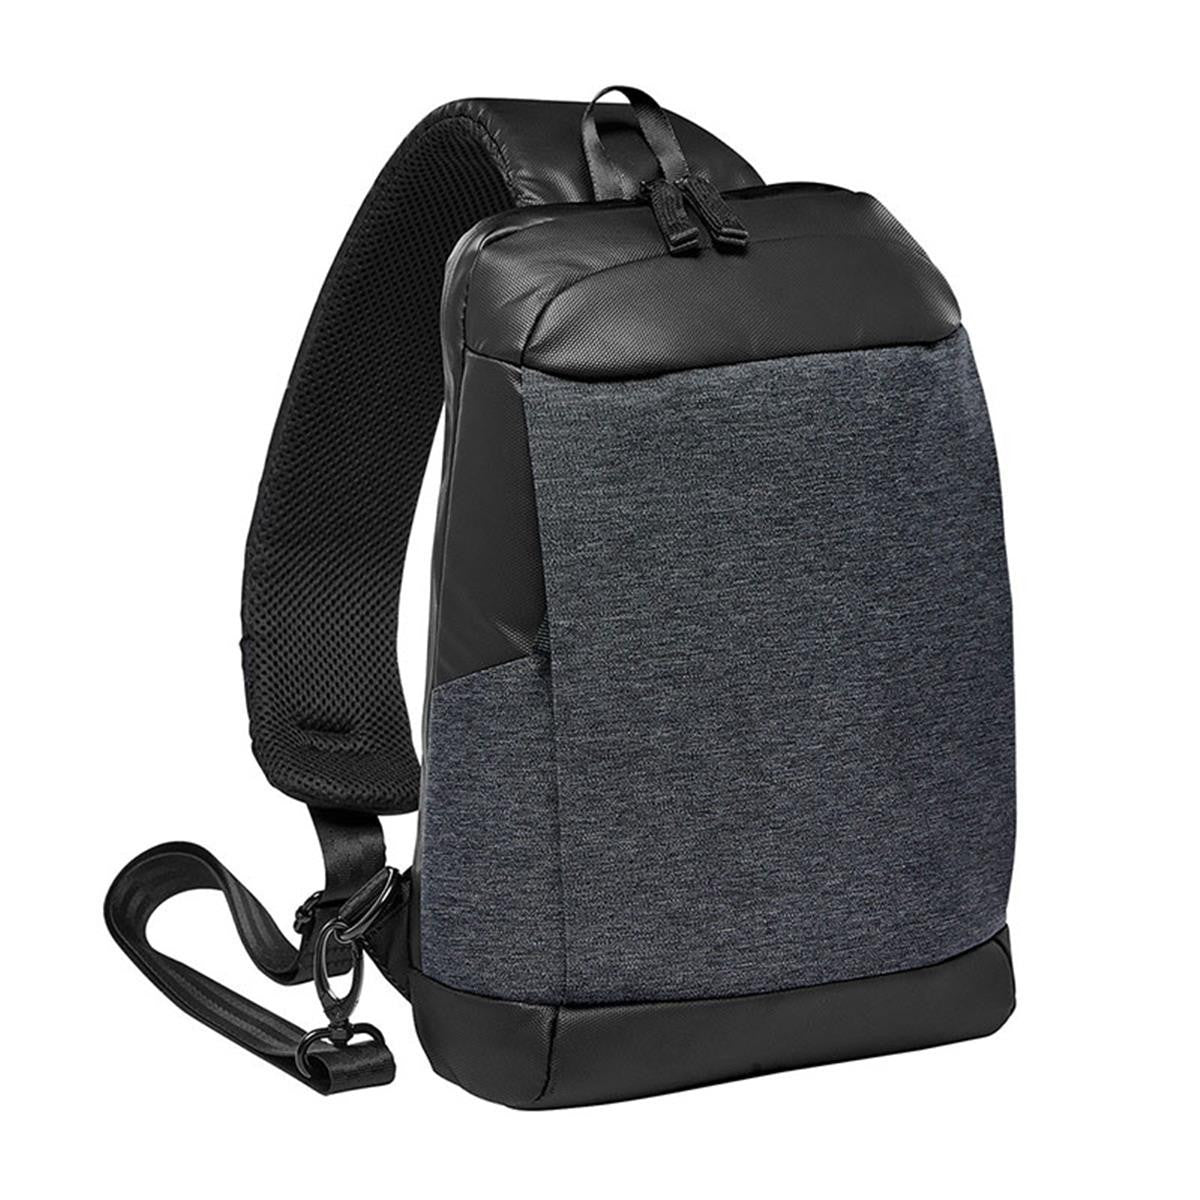 CMT-4    Quito Sling Backpack